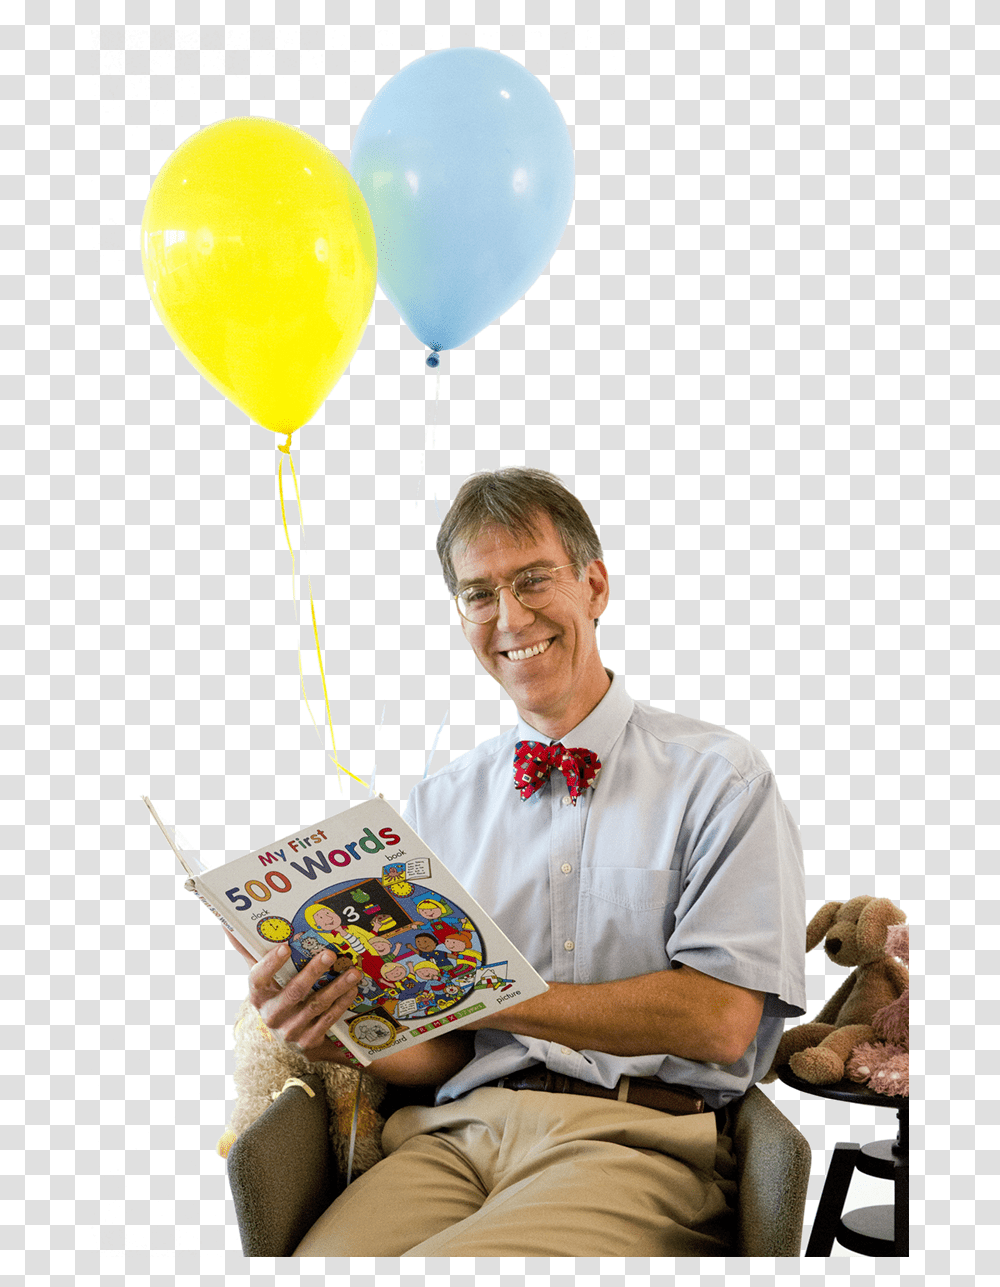 Pierre Lamothe Sitting, Person, Human, Ball, Balloon Transparent Png